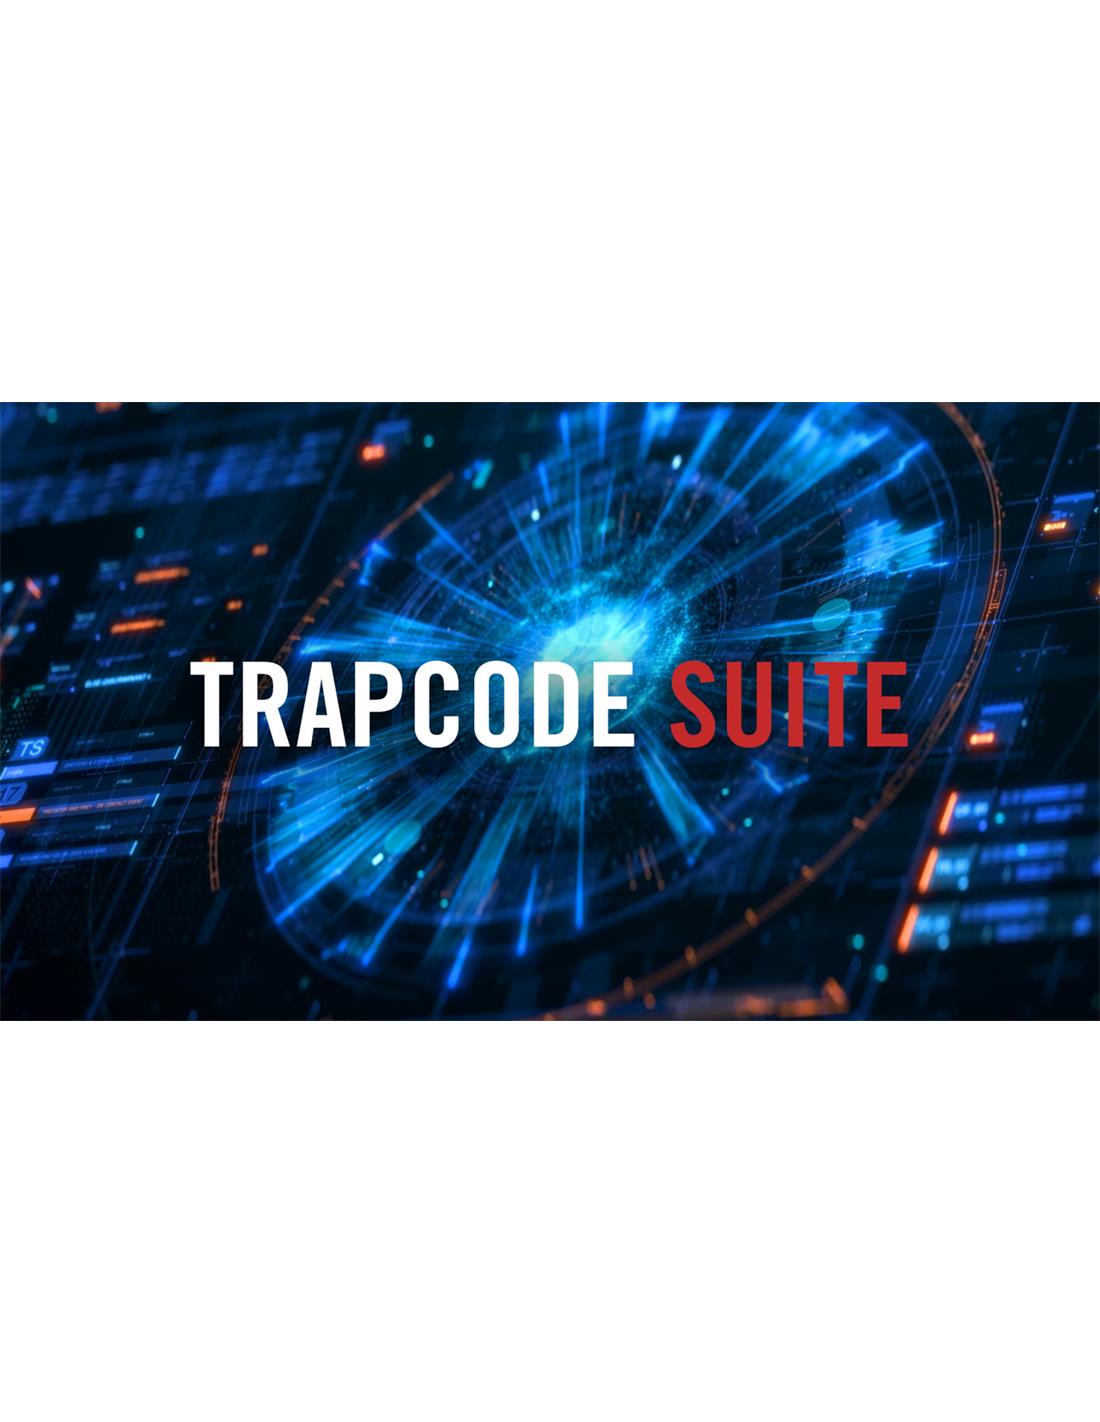 Red Giant Trapcode Suite 2024.0.1 instal the new version for ipod